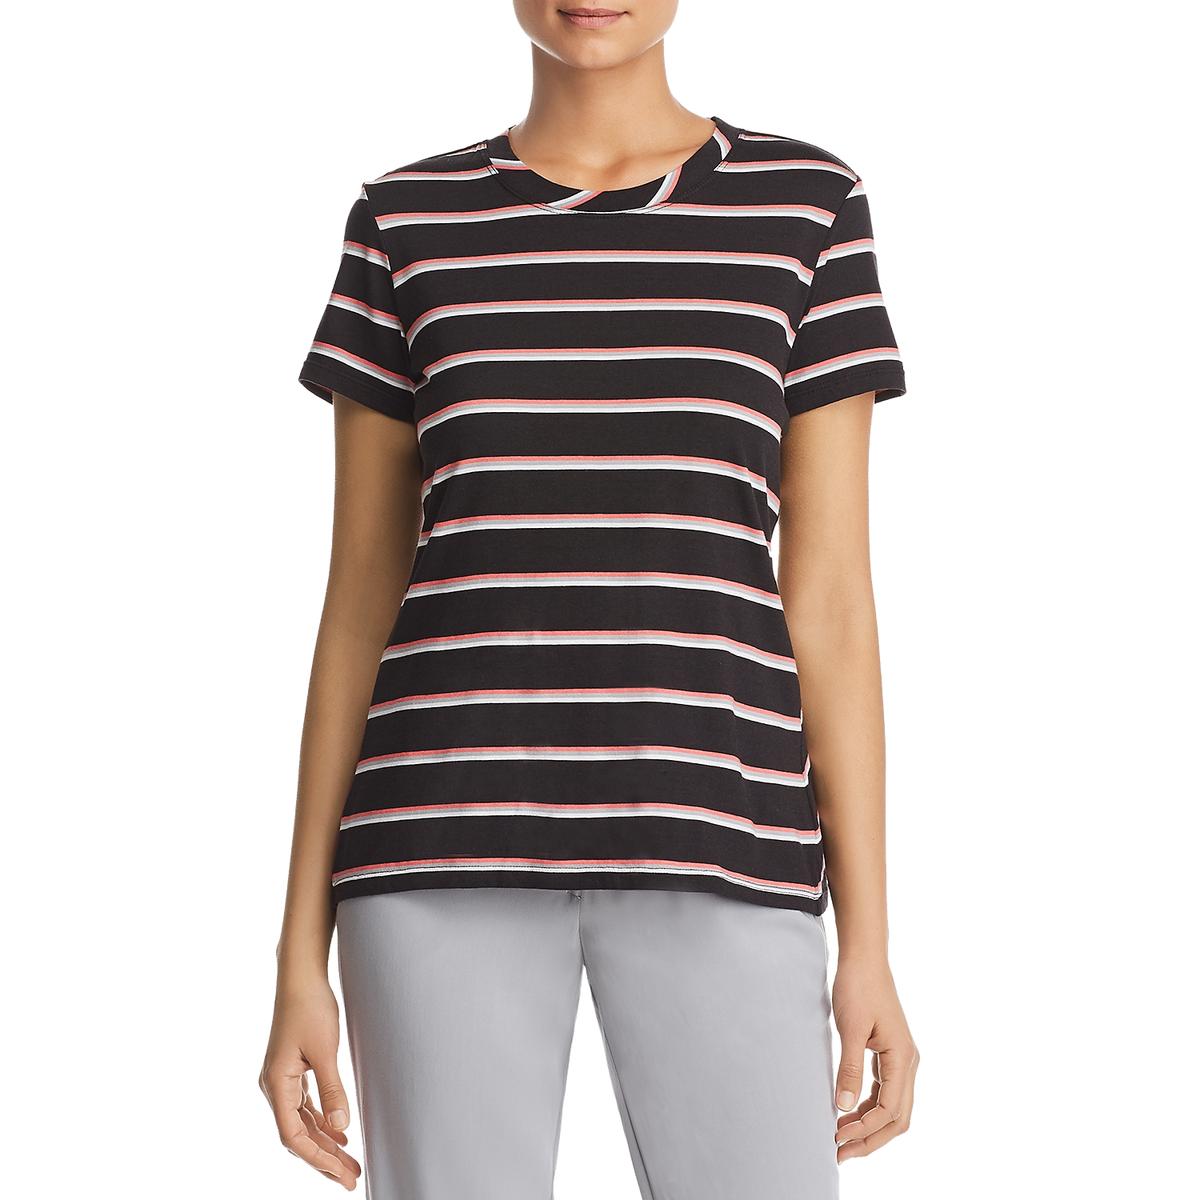 Kenneth Cole New York Womens Crewneck Knot-Front Tee Top Shirt BHFO 3962